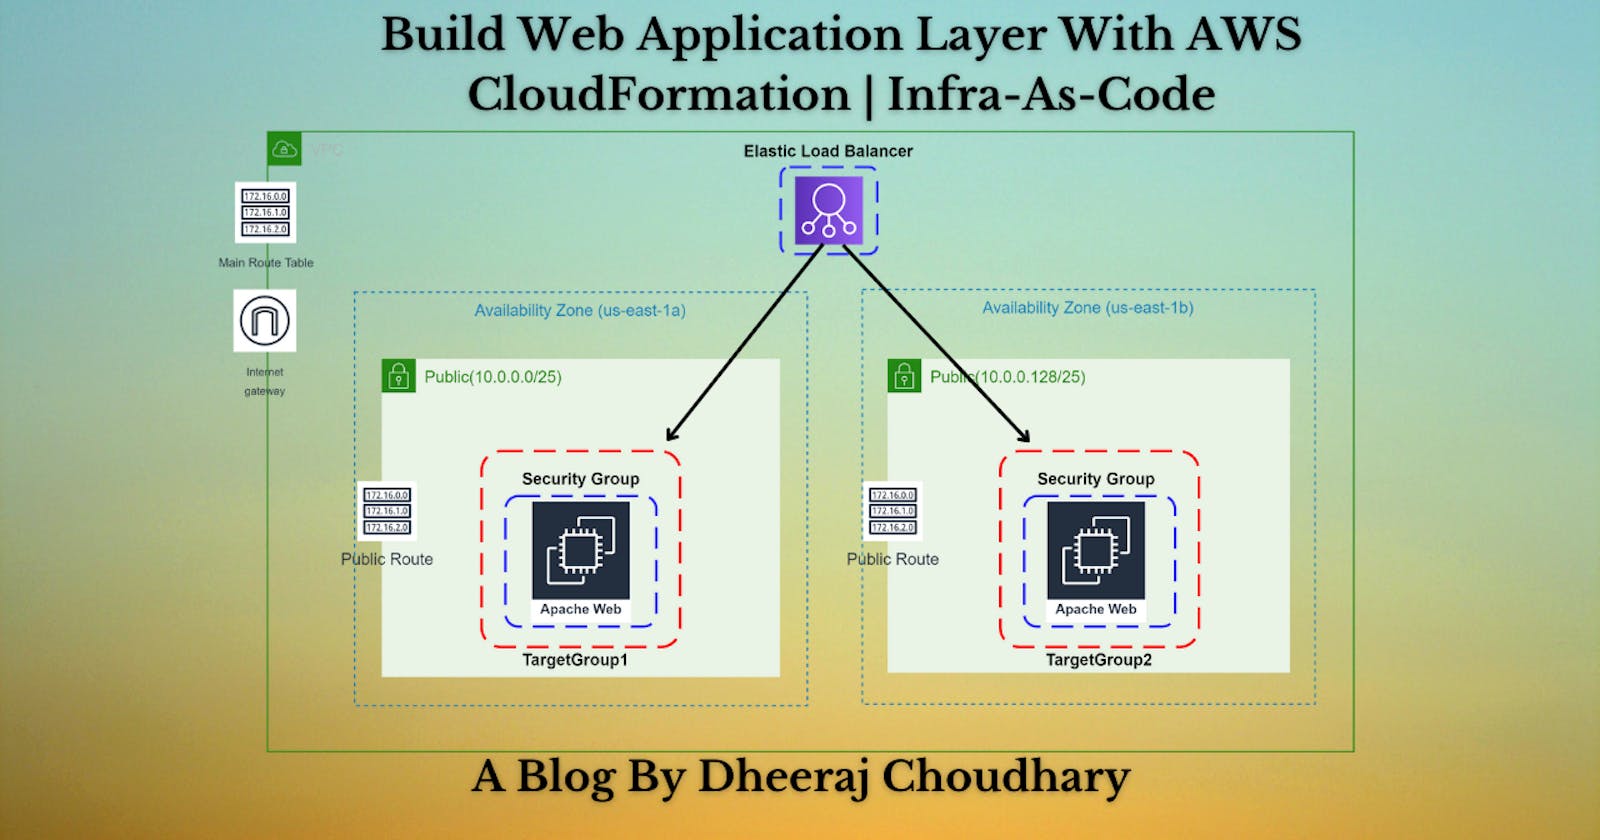 Build Web Application Layer With AWS CloudFormation | Infra-As-Code